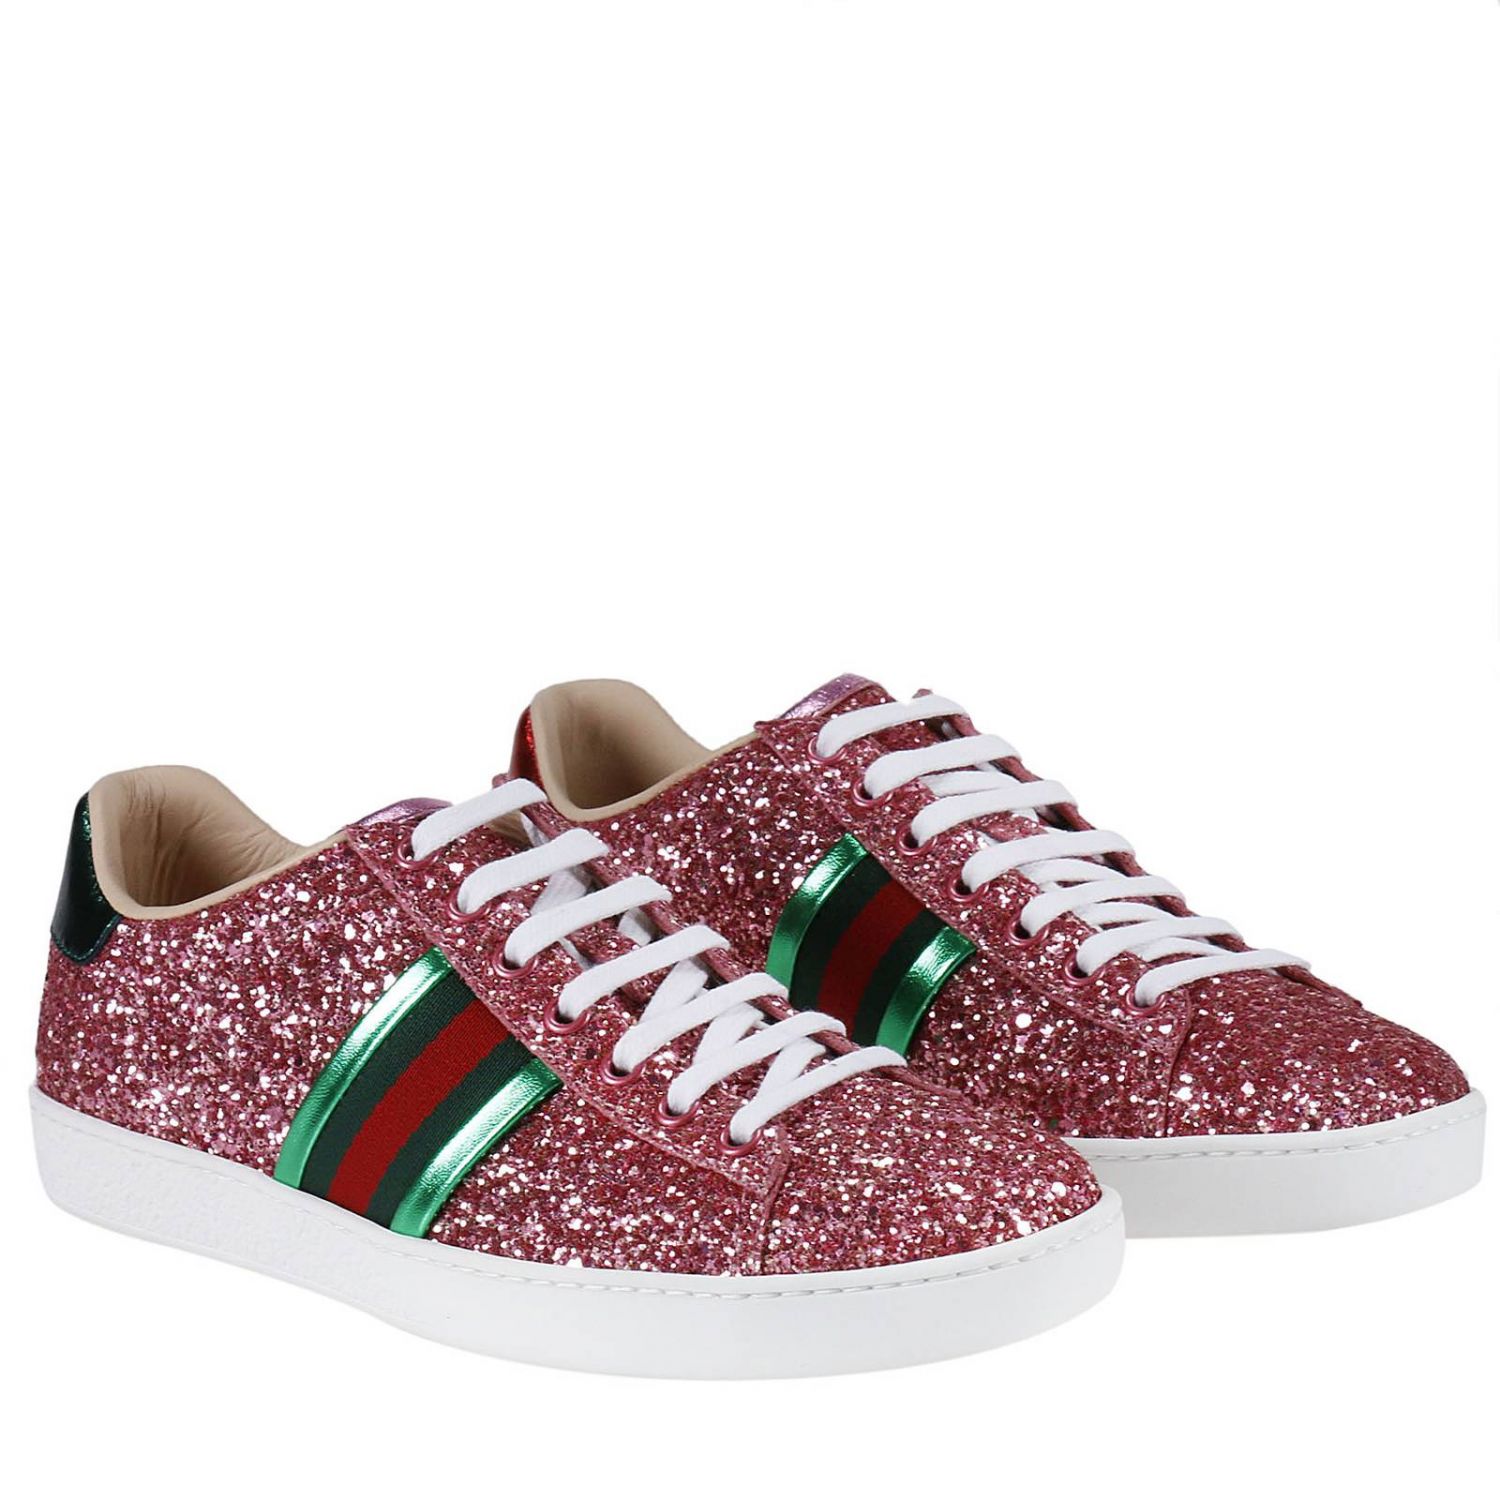 GUCCI: Ace Sneakers with web details and glitter surface | Sneakers Gucci Women Pink | Sneakers 